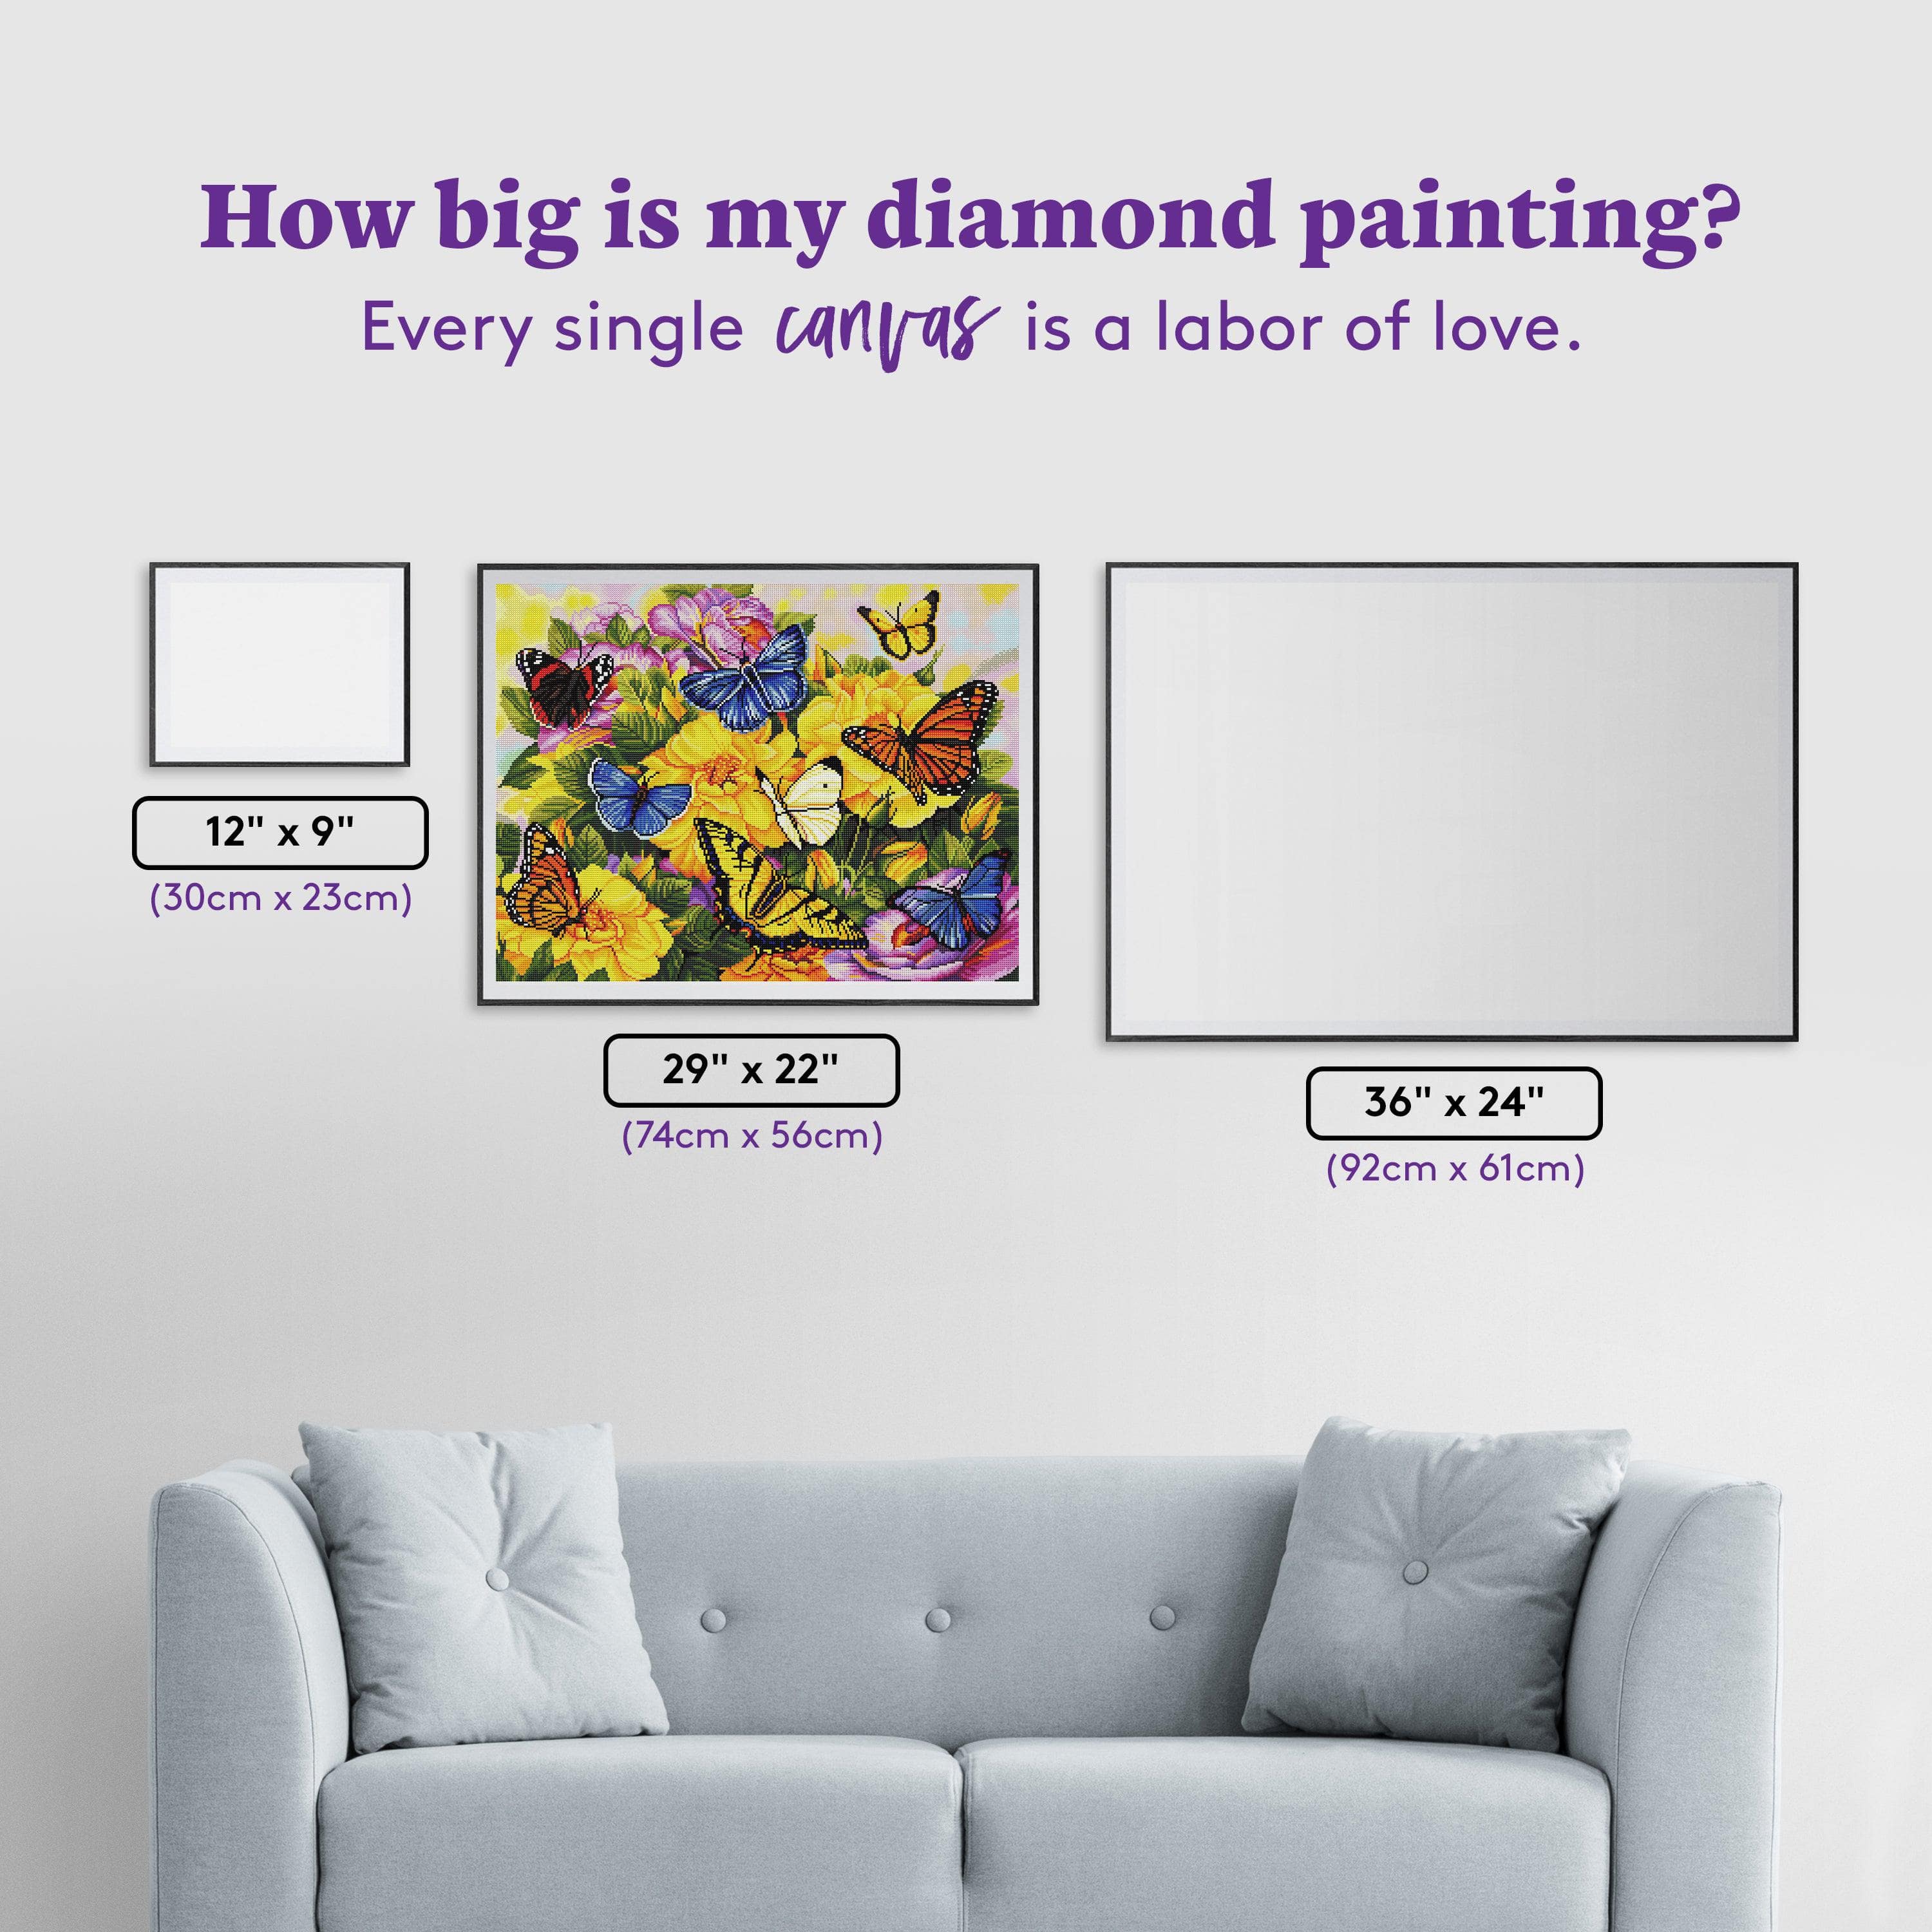 FILASLFT Butterfly Diamond Painting Kits for Adults,DIY Diamond Art,Flower  Diamond Painting Diamond Dots Paint with Diamonds for Home Wall Decor